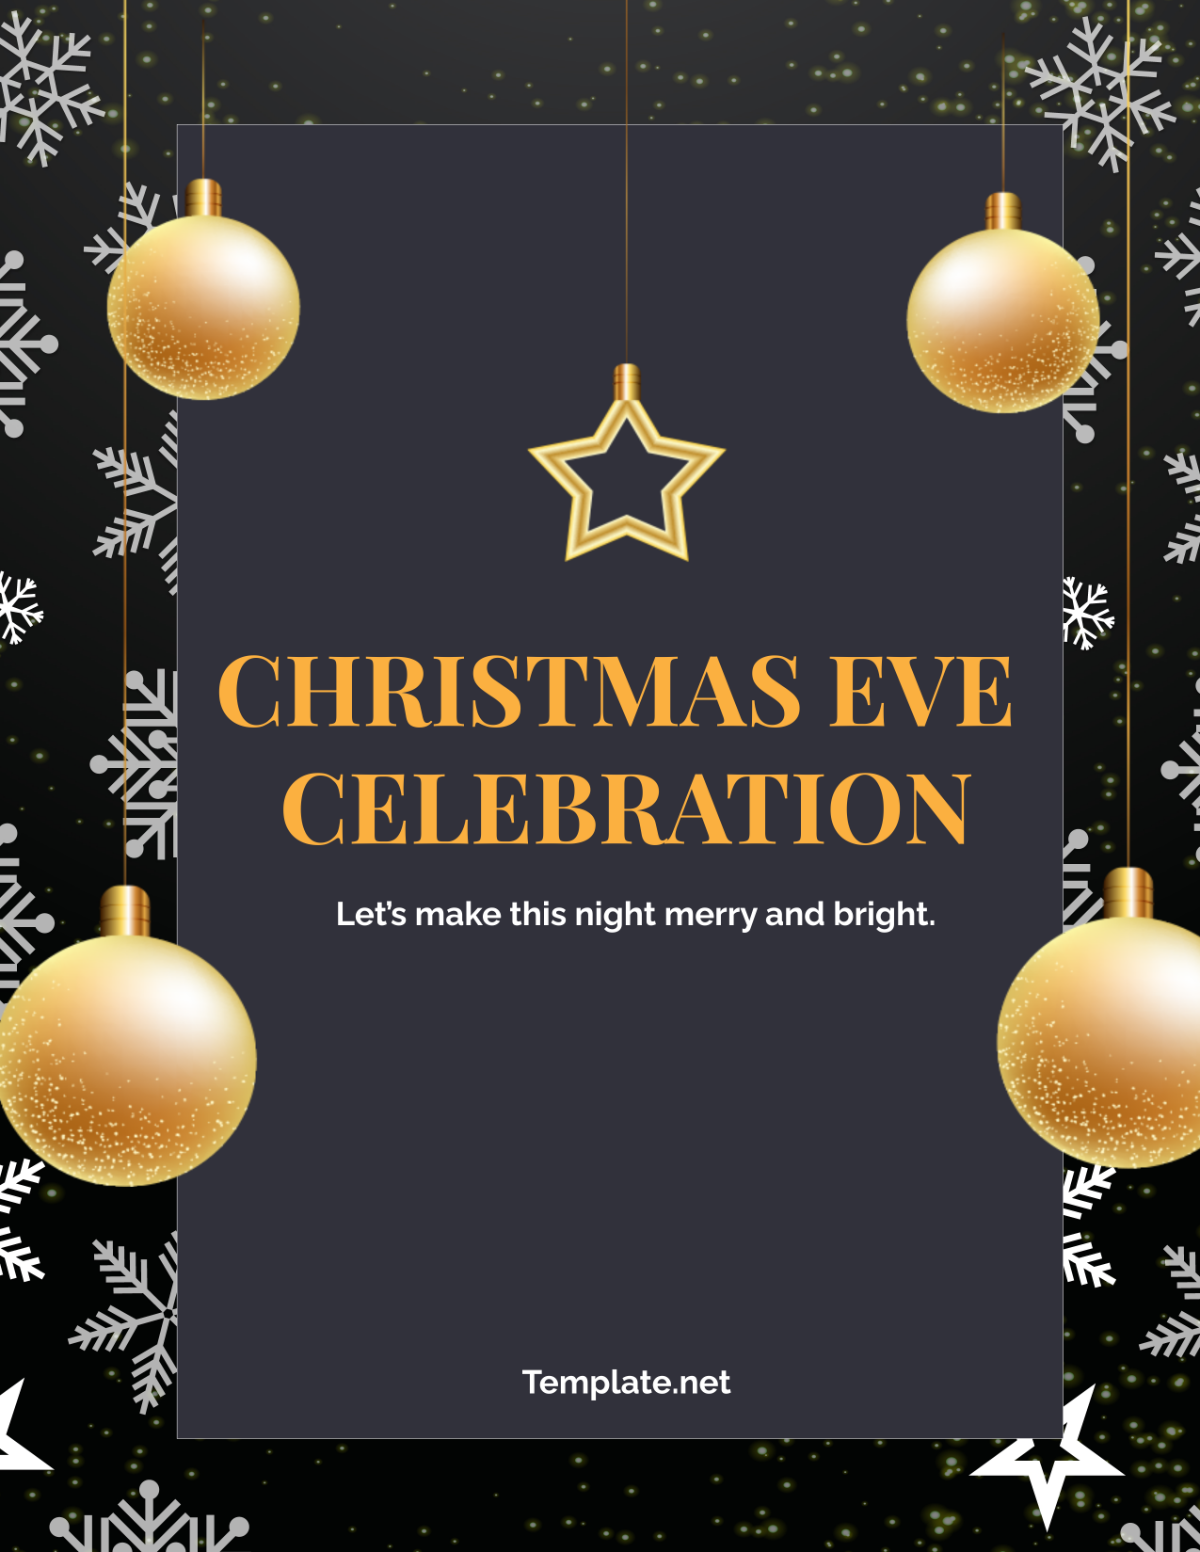 FREE Christmas Eve Templates & Examples Edit Online & Download